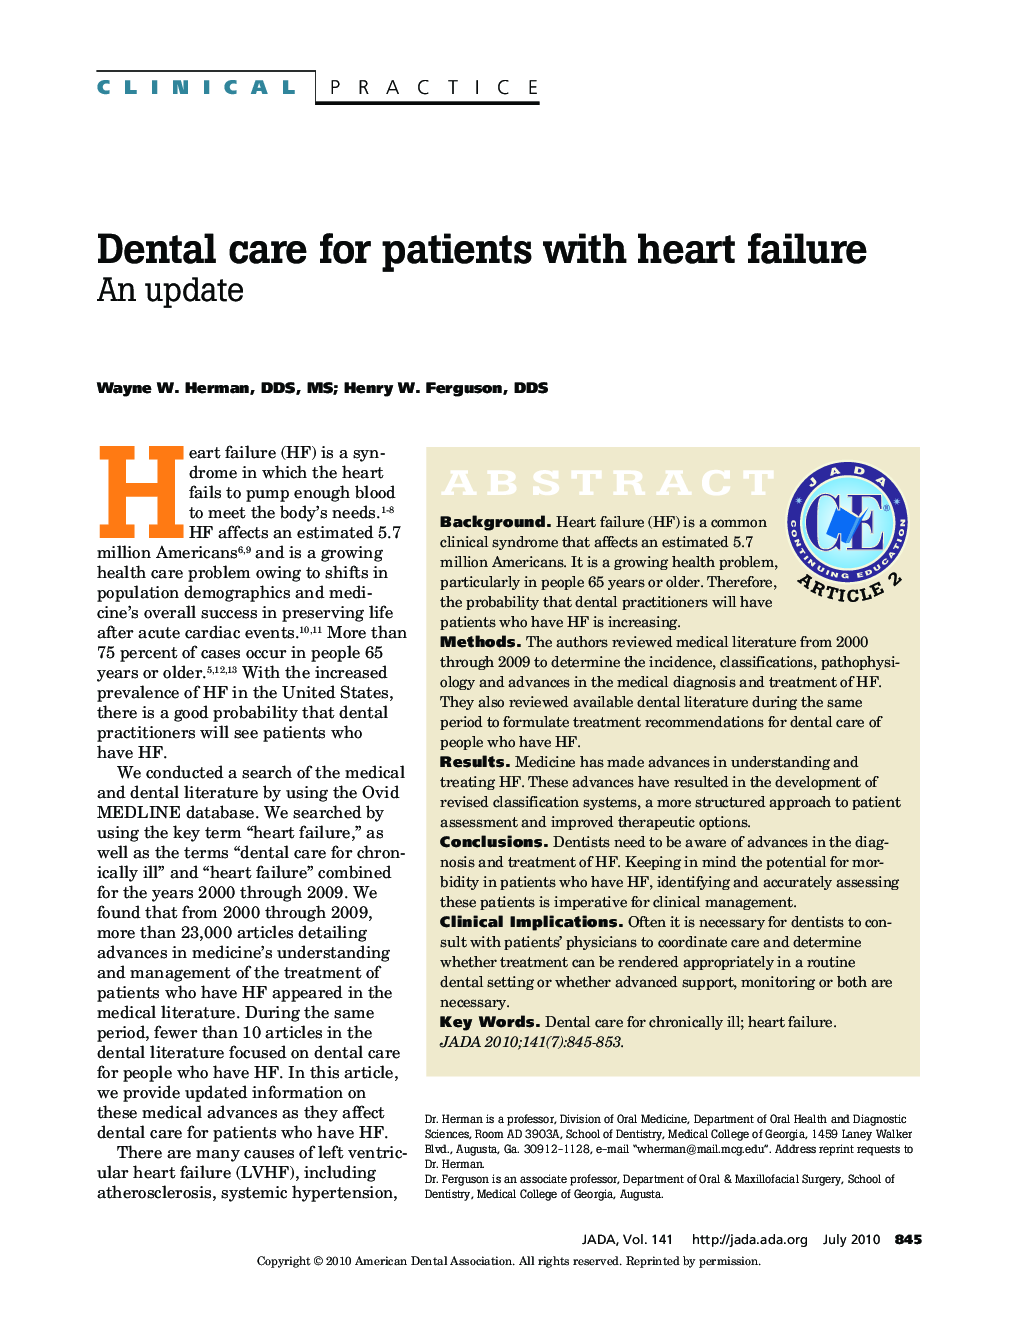 Dental care for patients with heart failure : An update